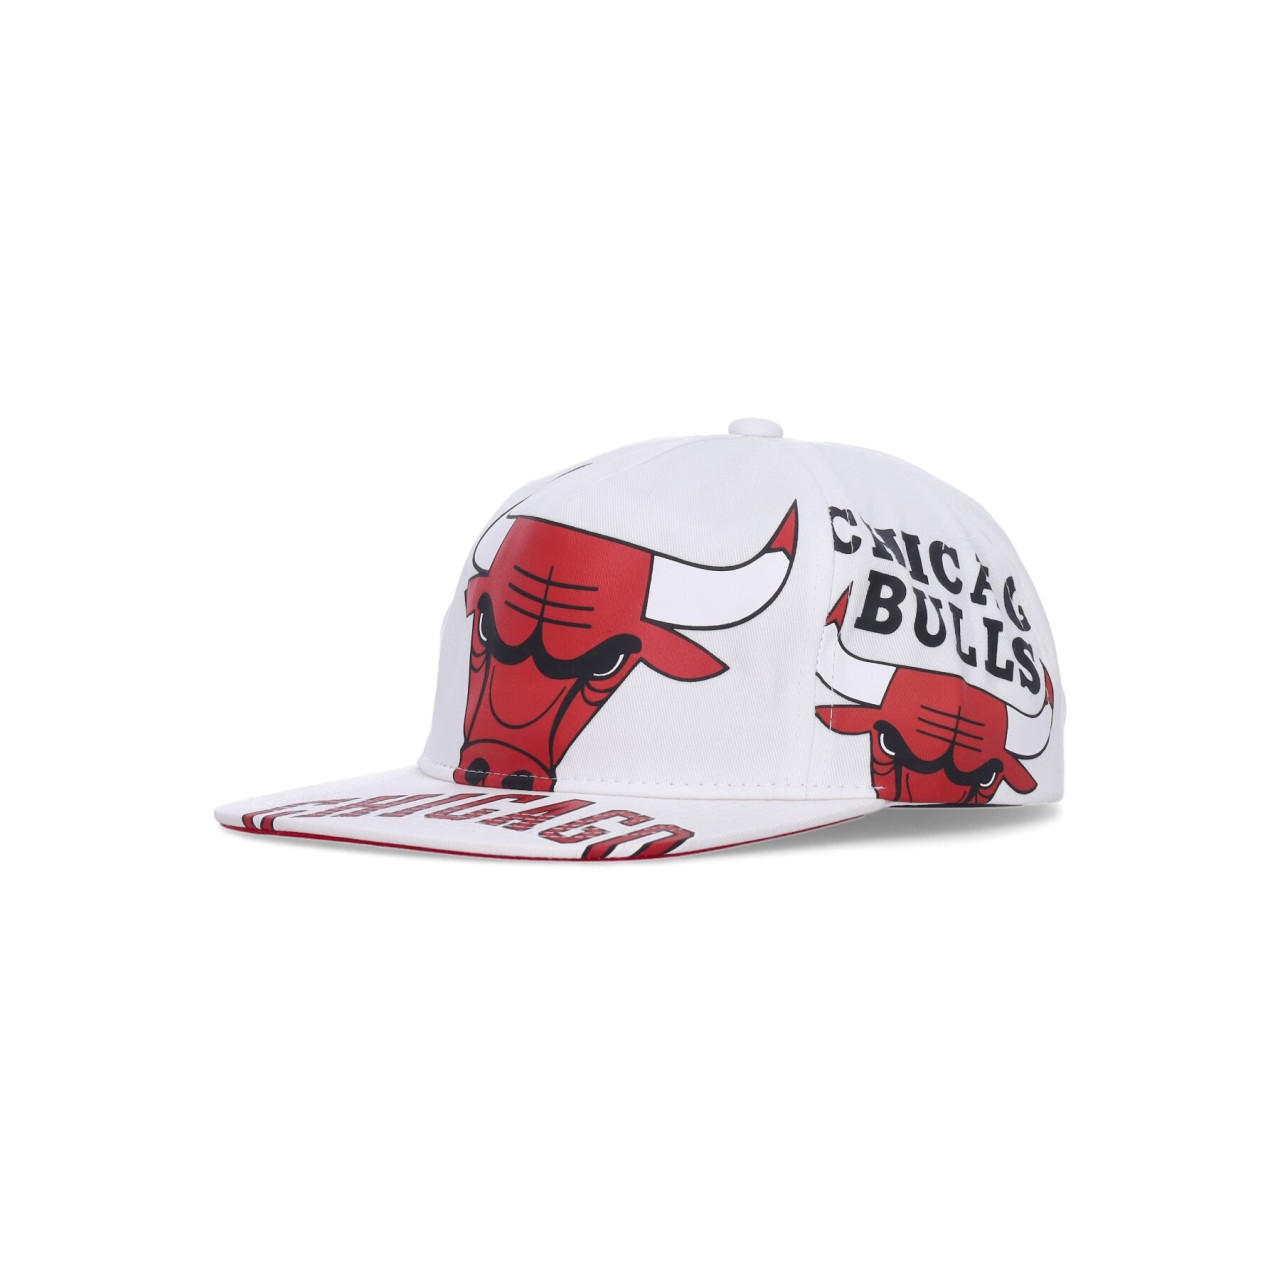 MITCHELL & NESS NBA IN YOUR FACE DEADSTOCK HWC CHIBUL HMUS5630-CBUYYPPPWHIT